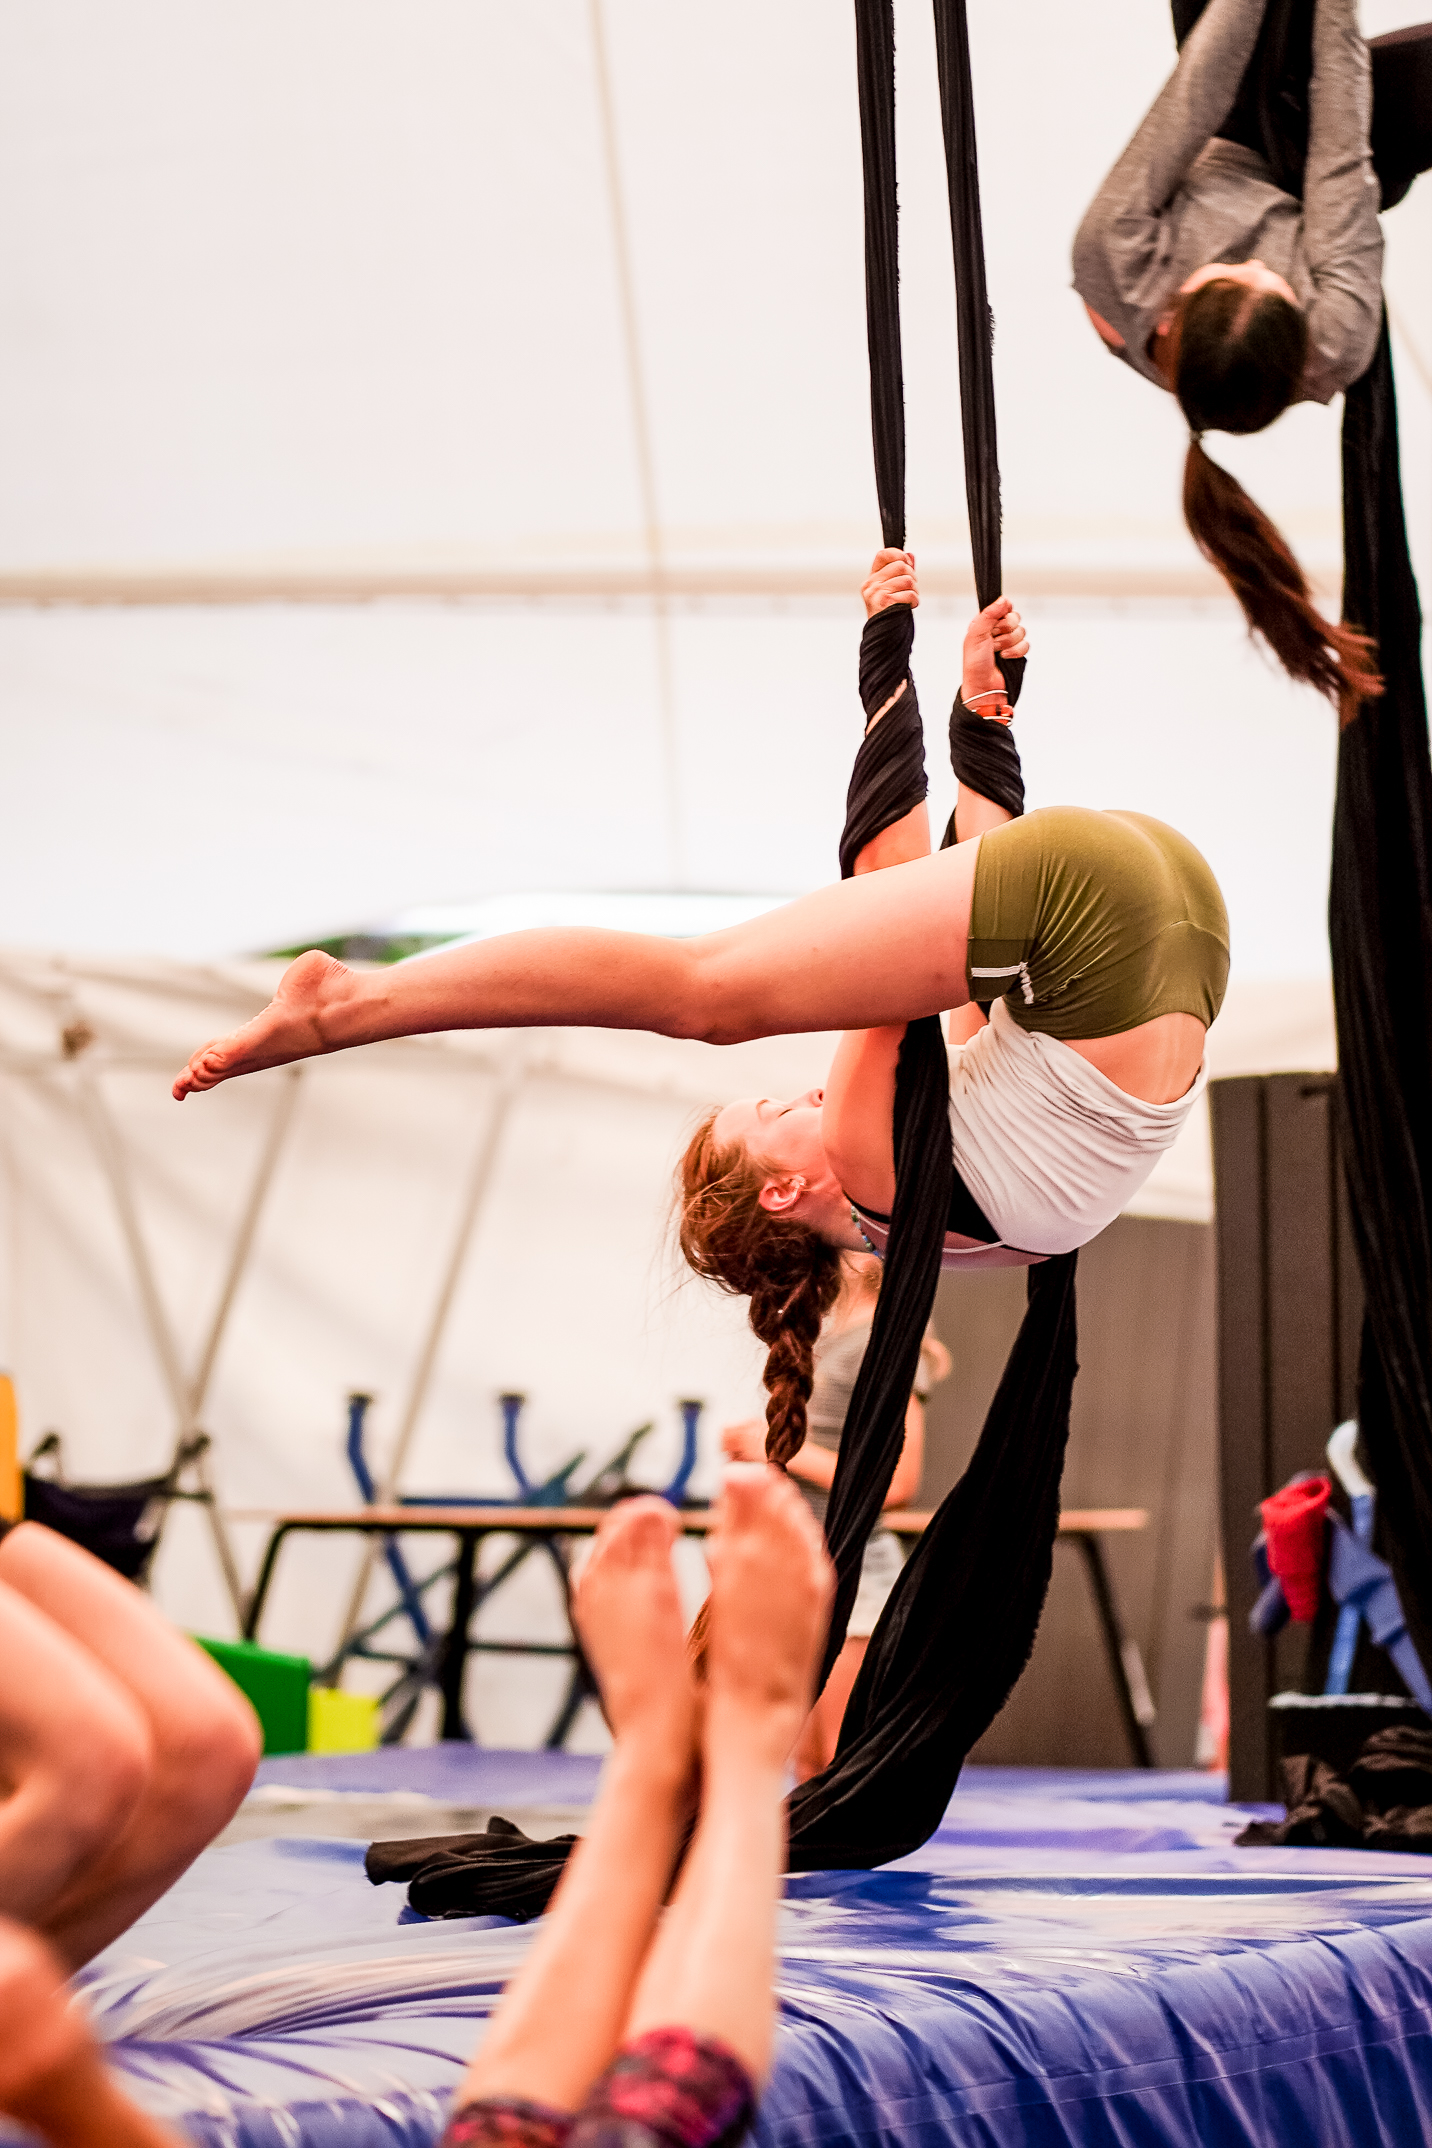 one person is inverted on an aerial silk low to the ground, people stretching can be seen in the background